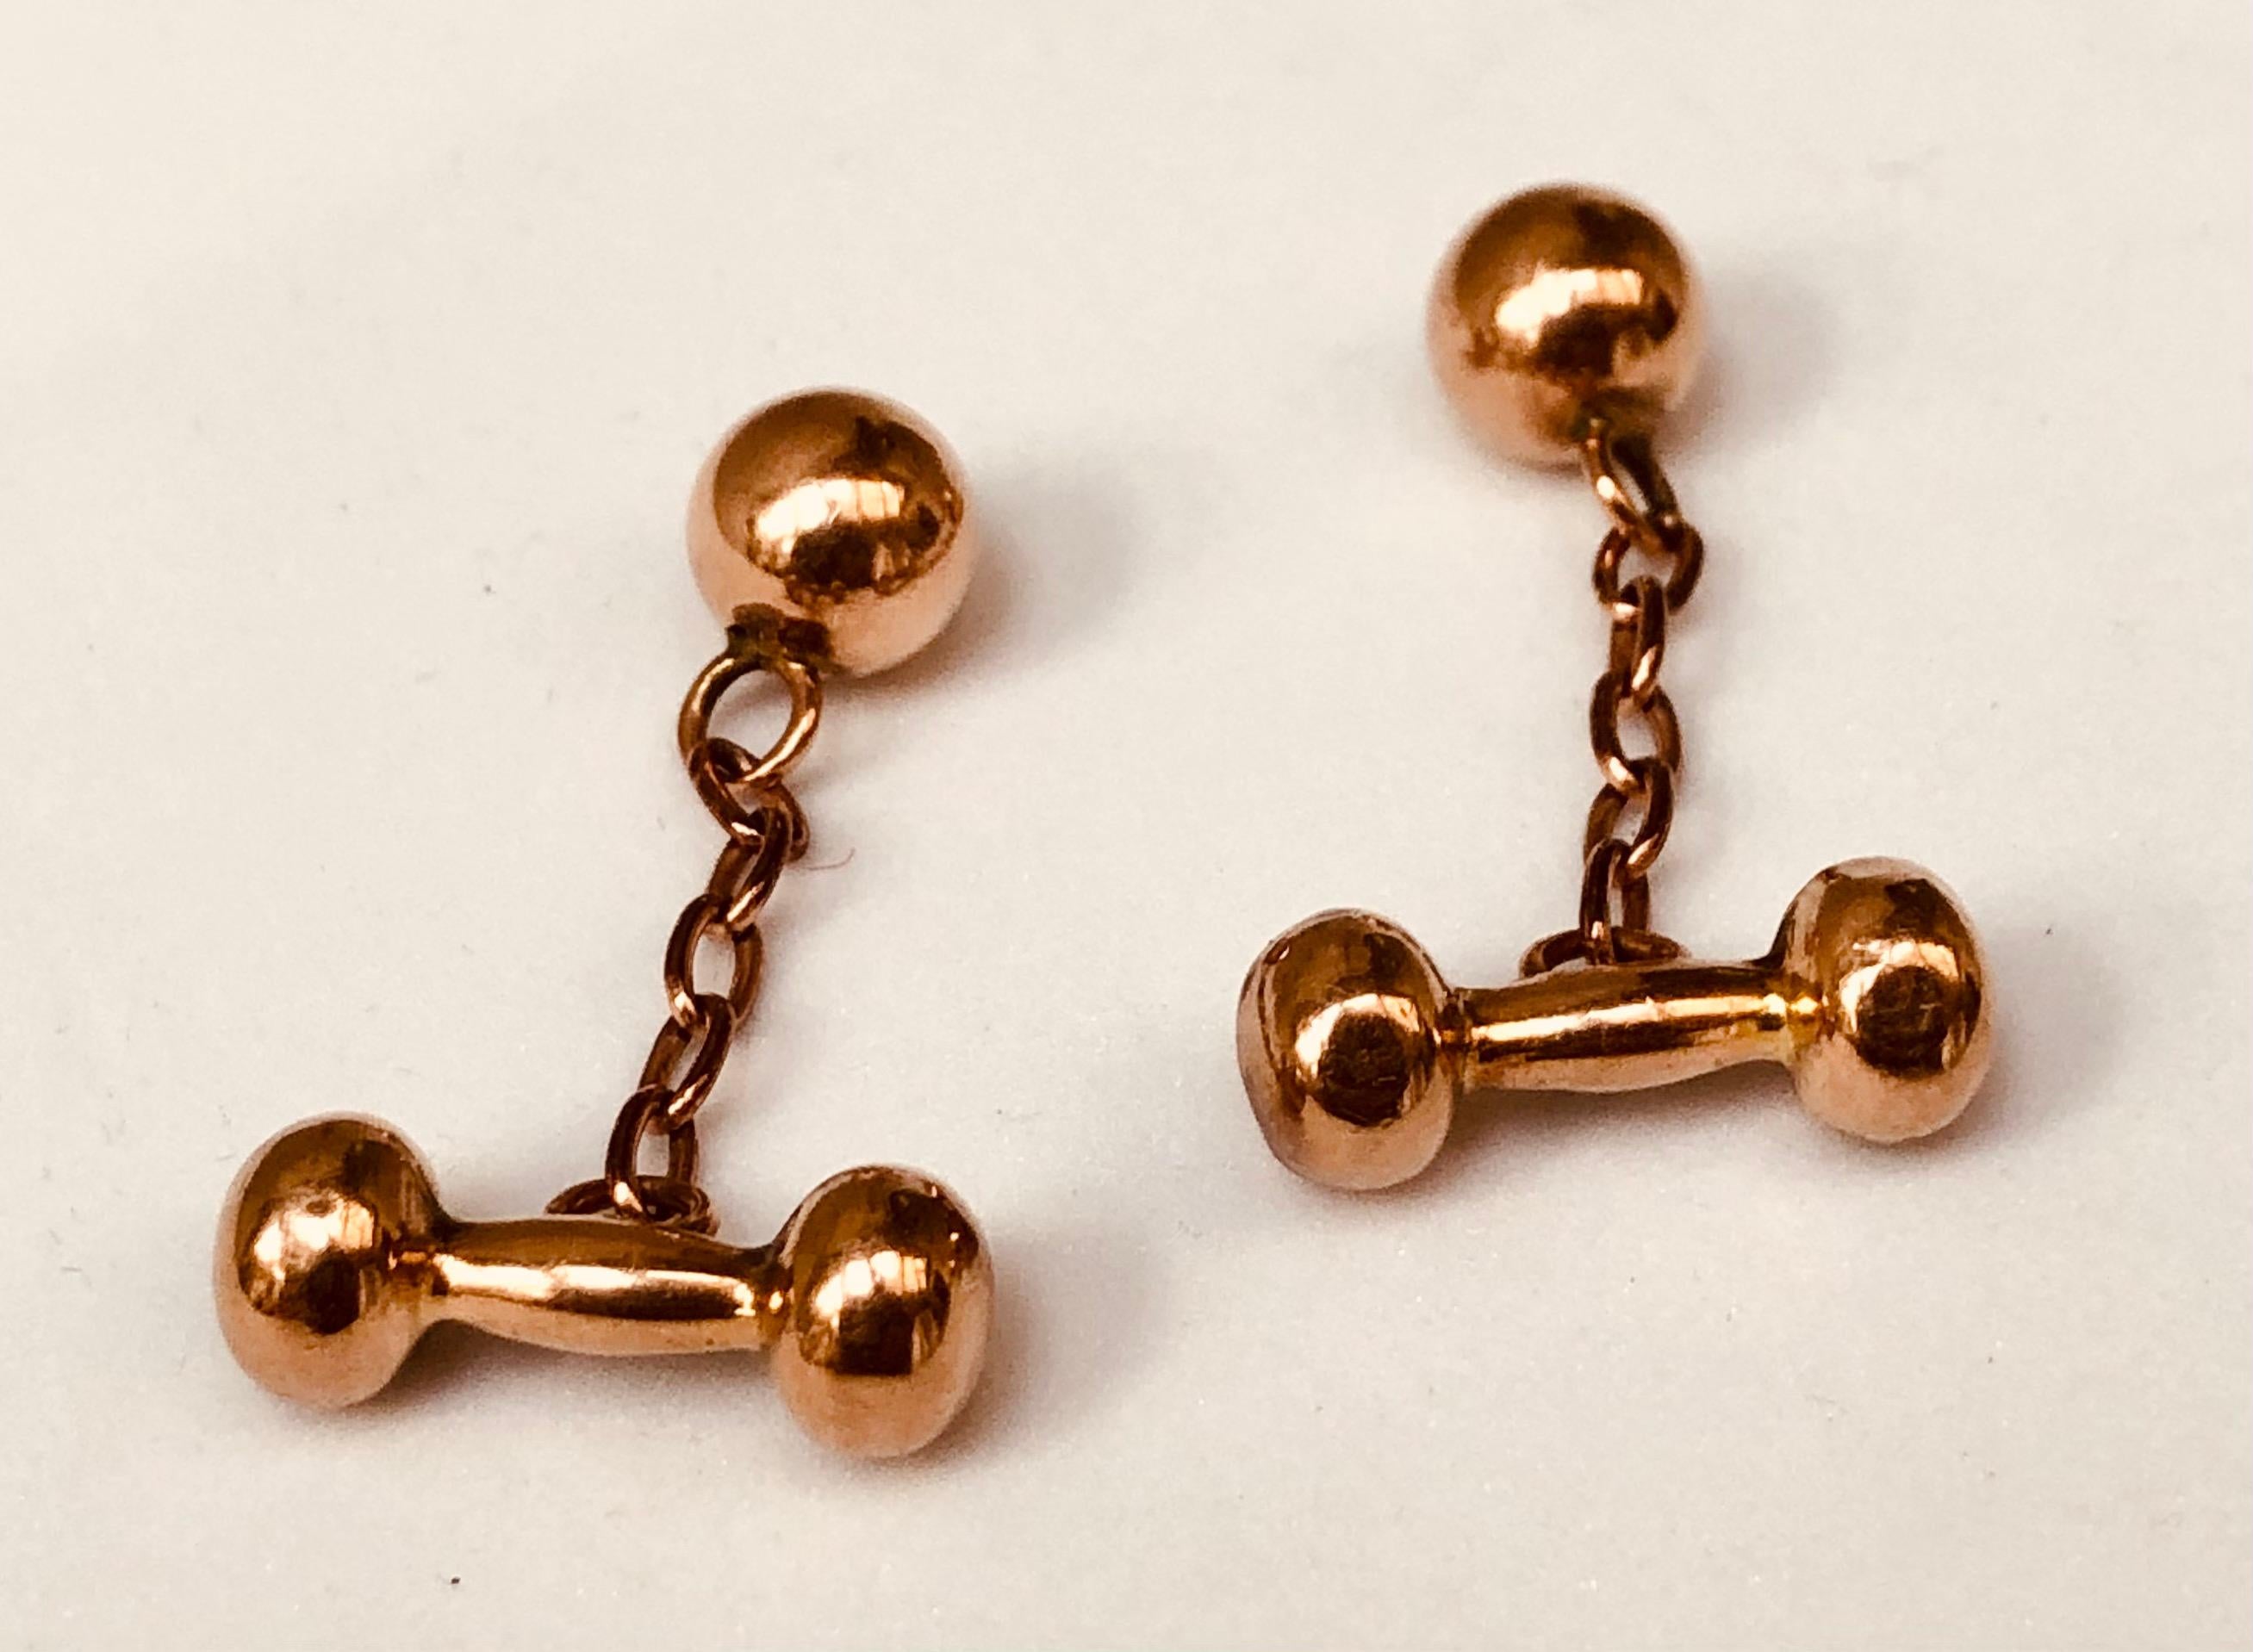 Antique 9 carat rose gold chain cuff links with bar and ball. Perfect for a special occasion or a wedding party 
gift . Whether for a Groom or important Zoom call these cuff links add a distinguished touch of class to every occasion. 

There are